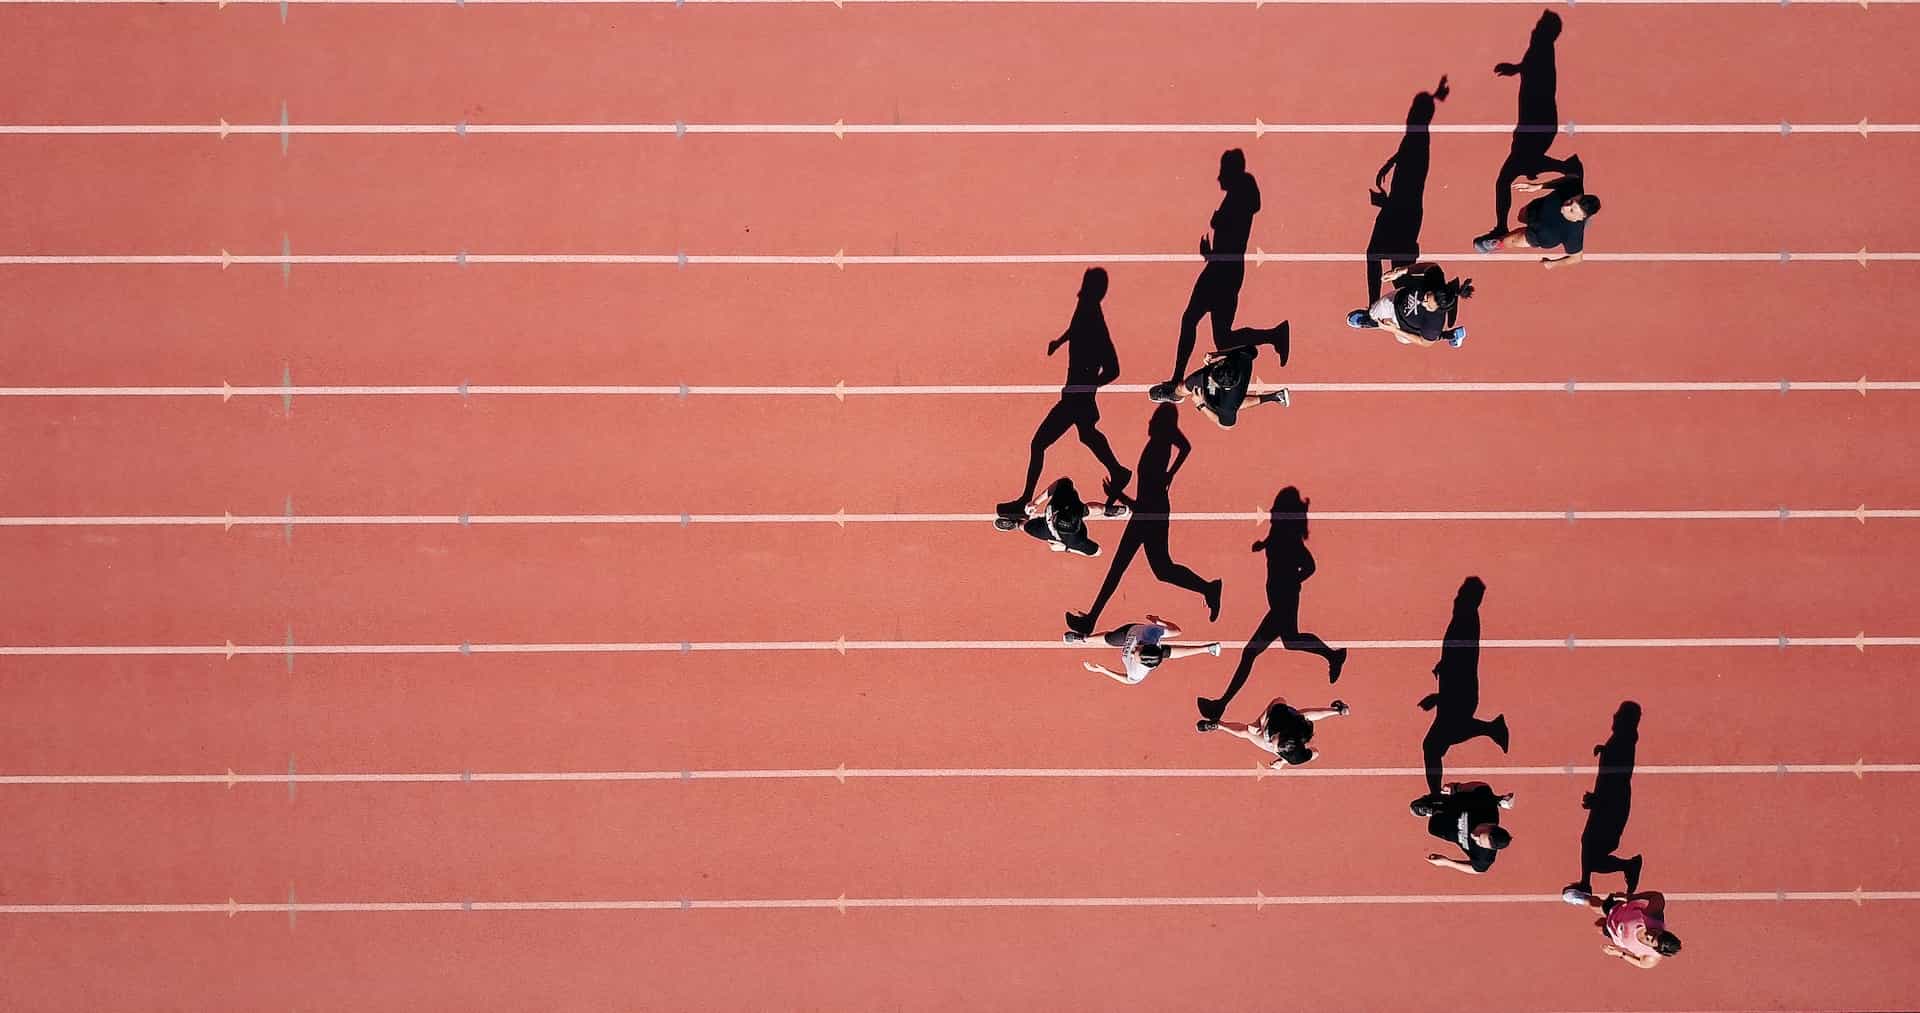 A top down view of several athlete runners training on an outdoor track and field course, with each runner’s shadow being dramatically cast on the ground thanks to the sun’s position.